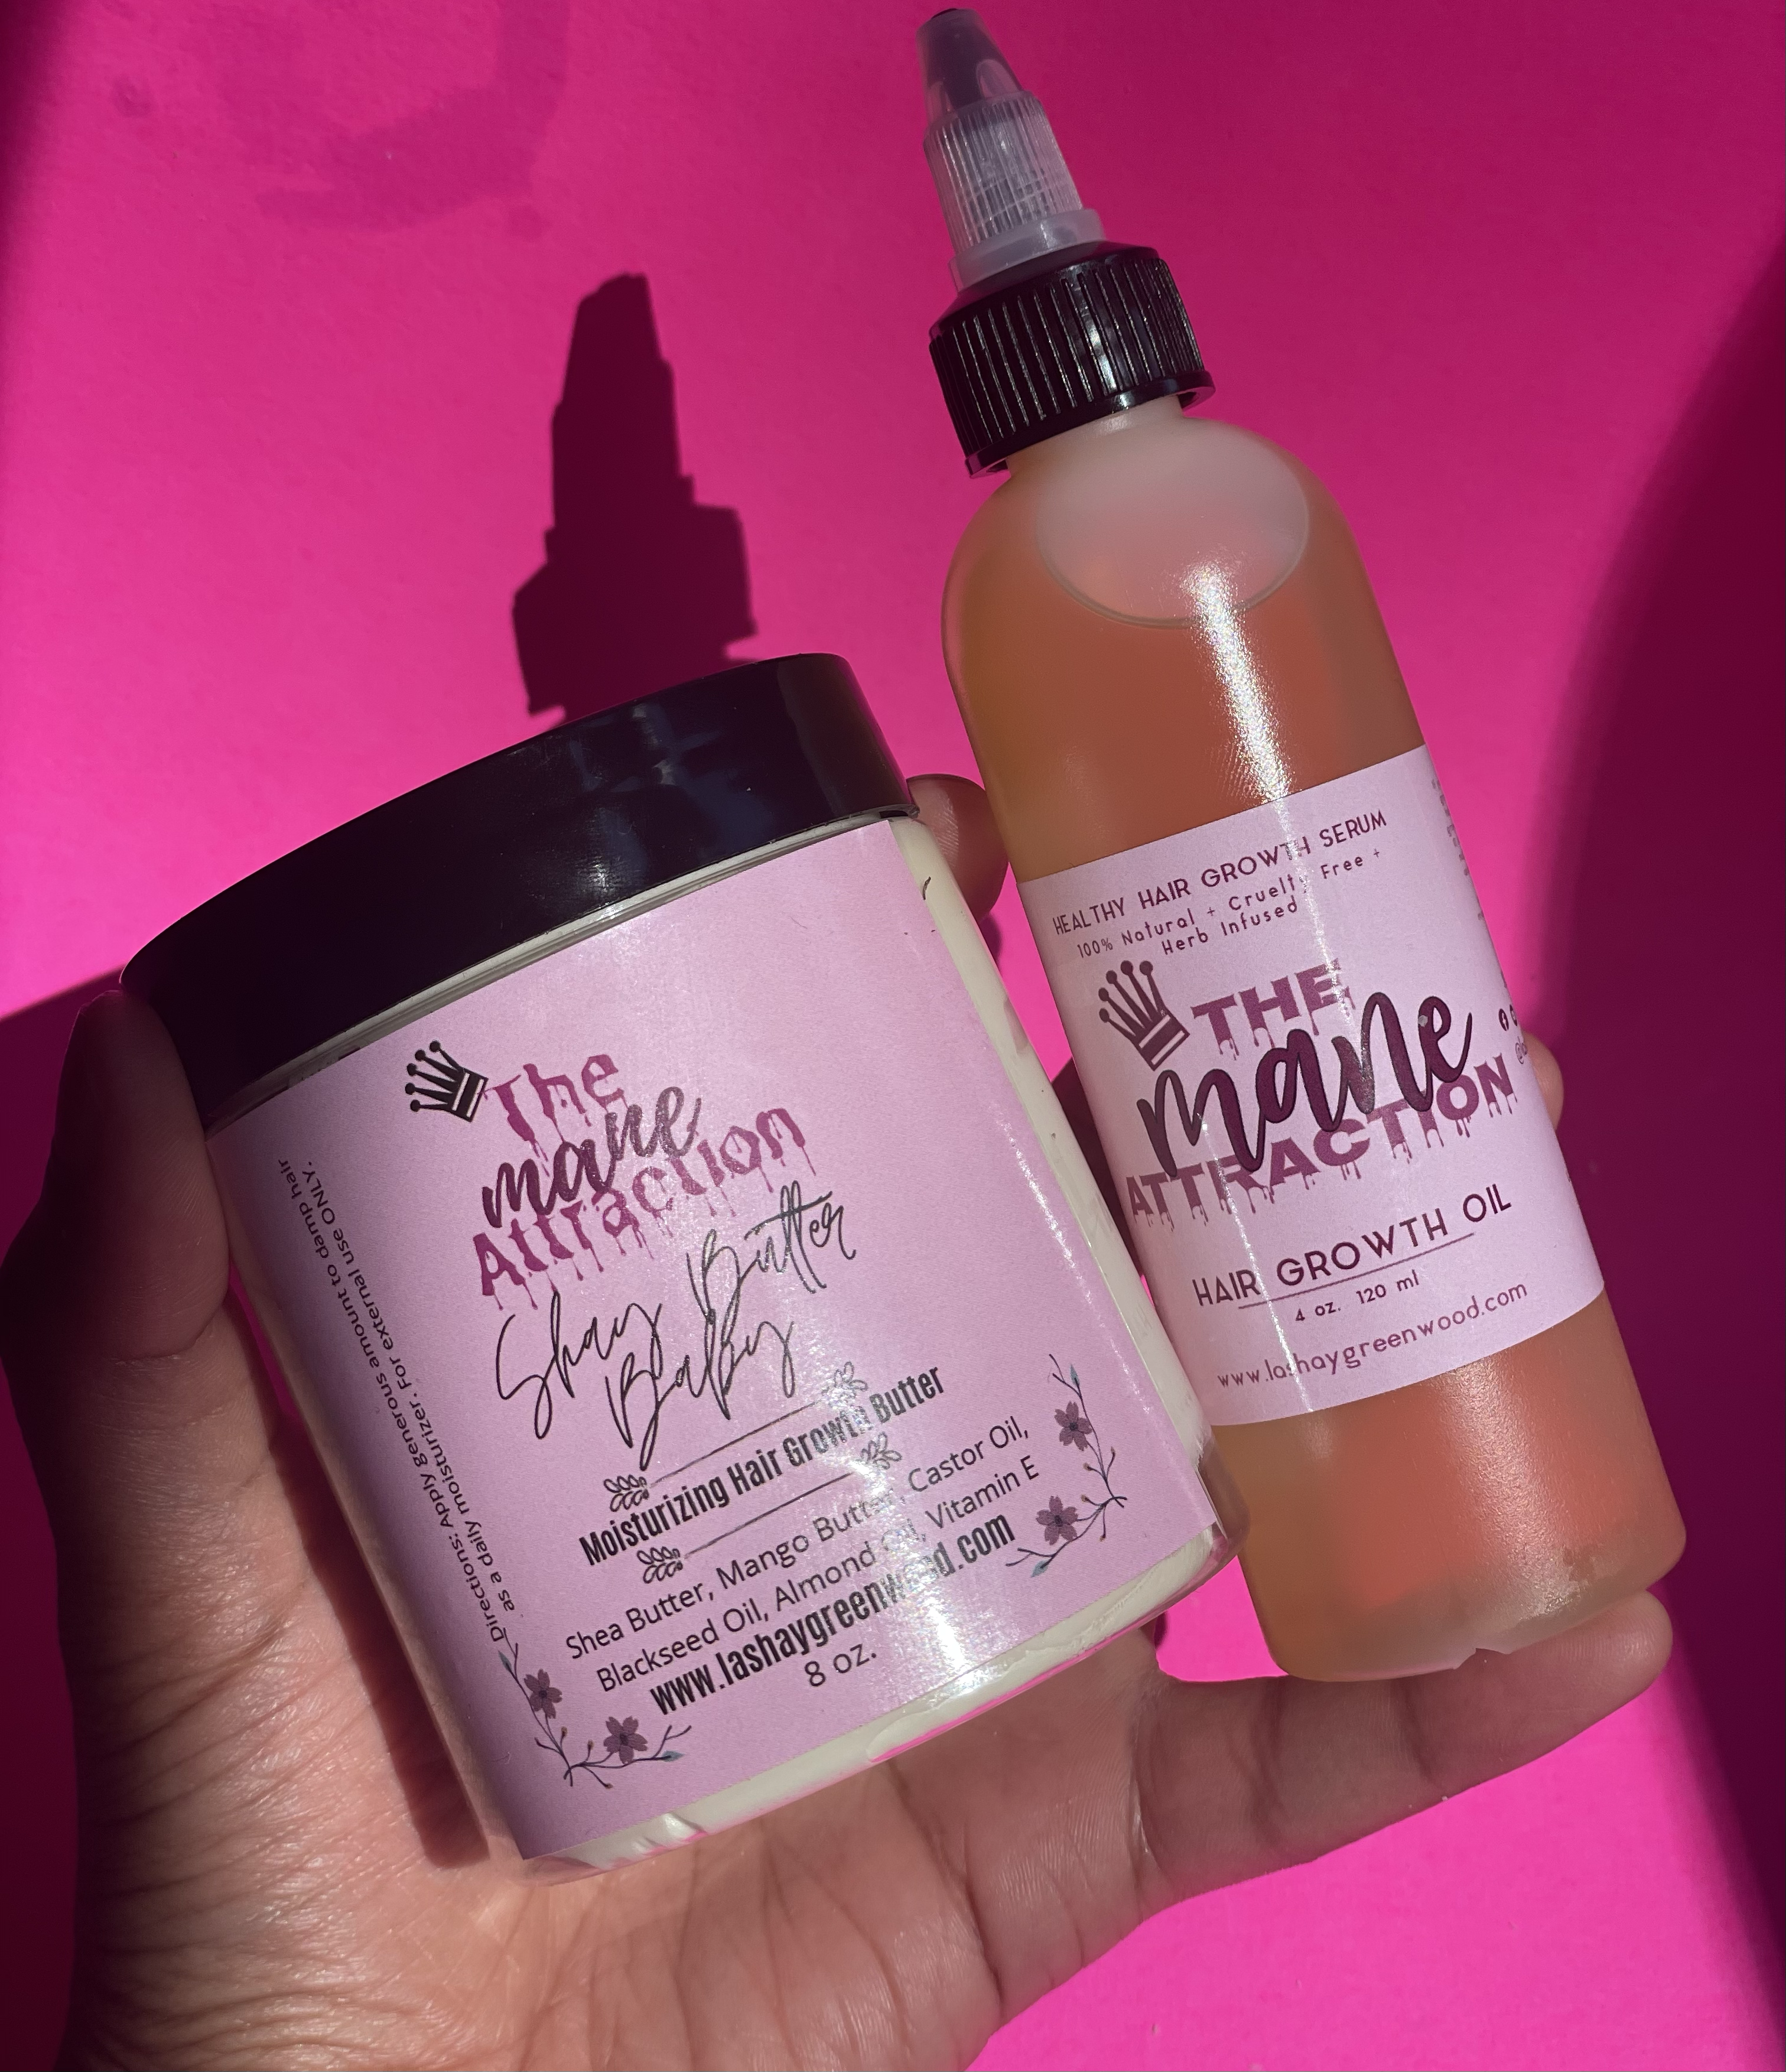 Hair Growth Bundle - The Mane Attraction